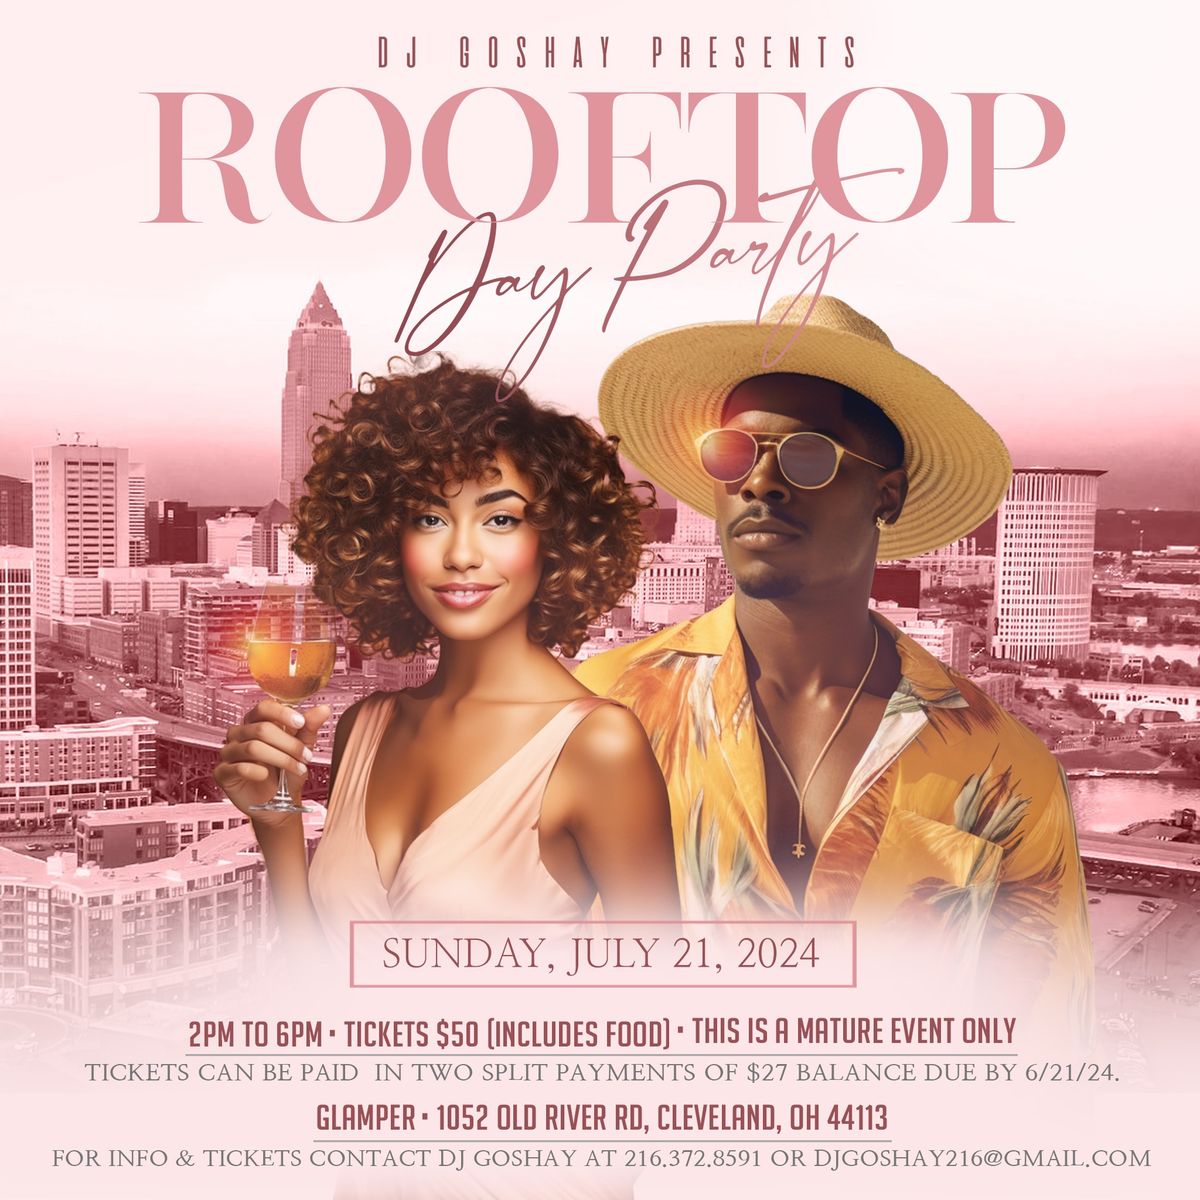 DjGoshay Presents The Rooftop Day Party.